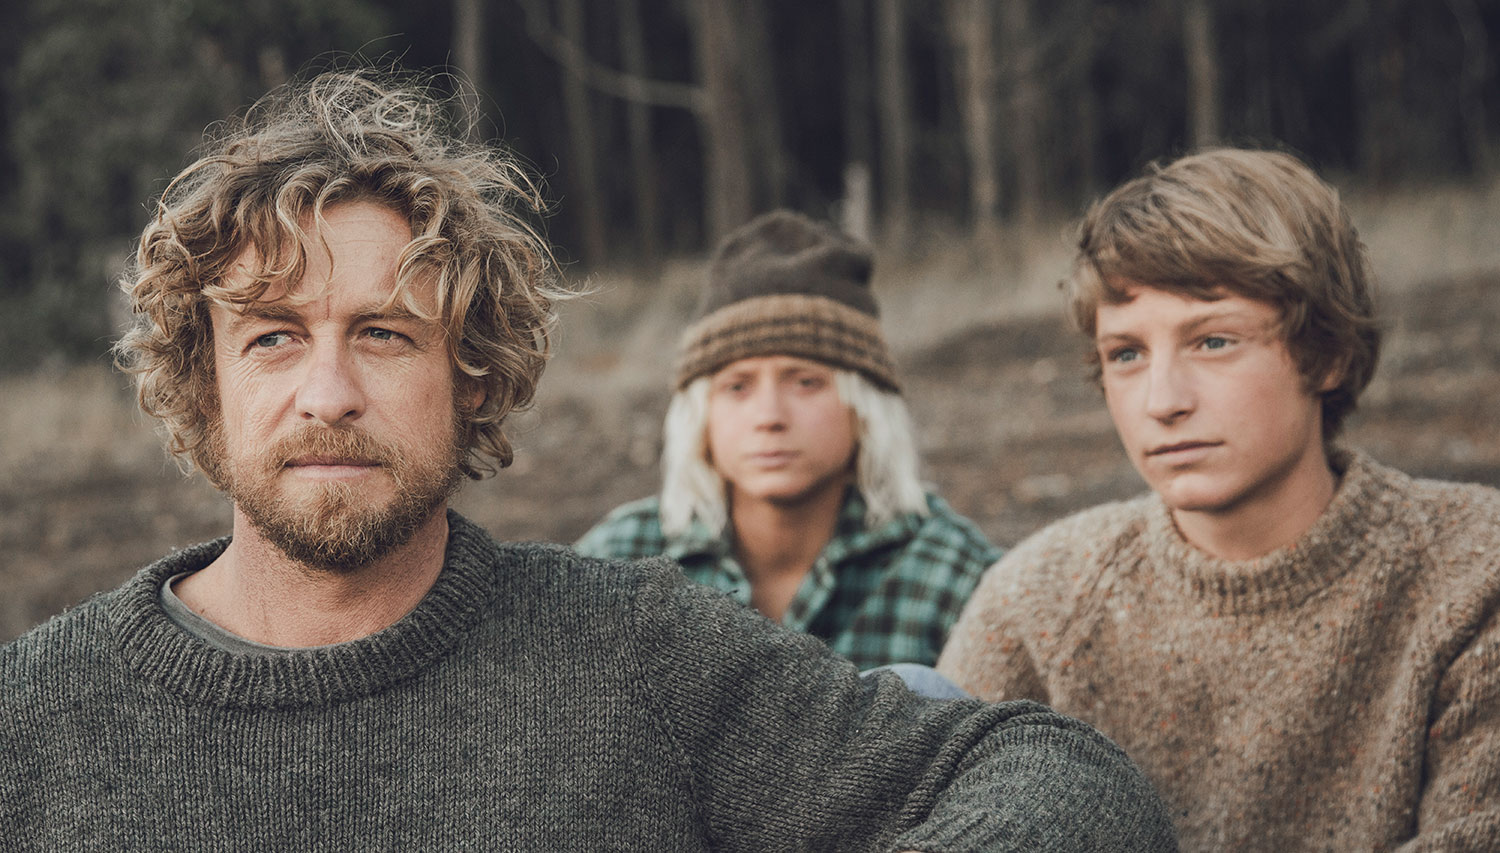 Sando (Simon Baker), Loonie (Ben Spence) and Pikelet (Samson Coulter) in a publicity photo for Breath, the movie based on Tim's Winton's book, filmed in Denmark, Western Australia